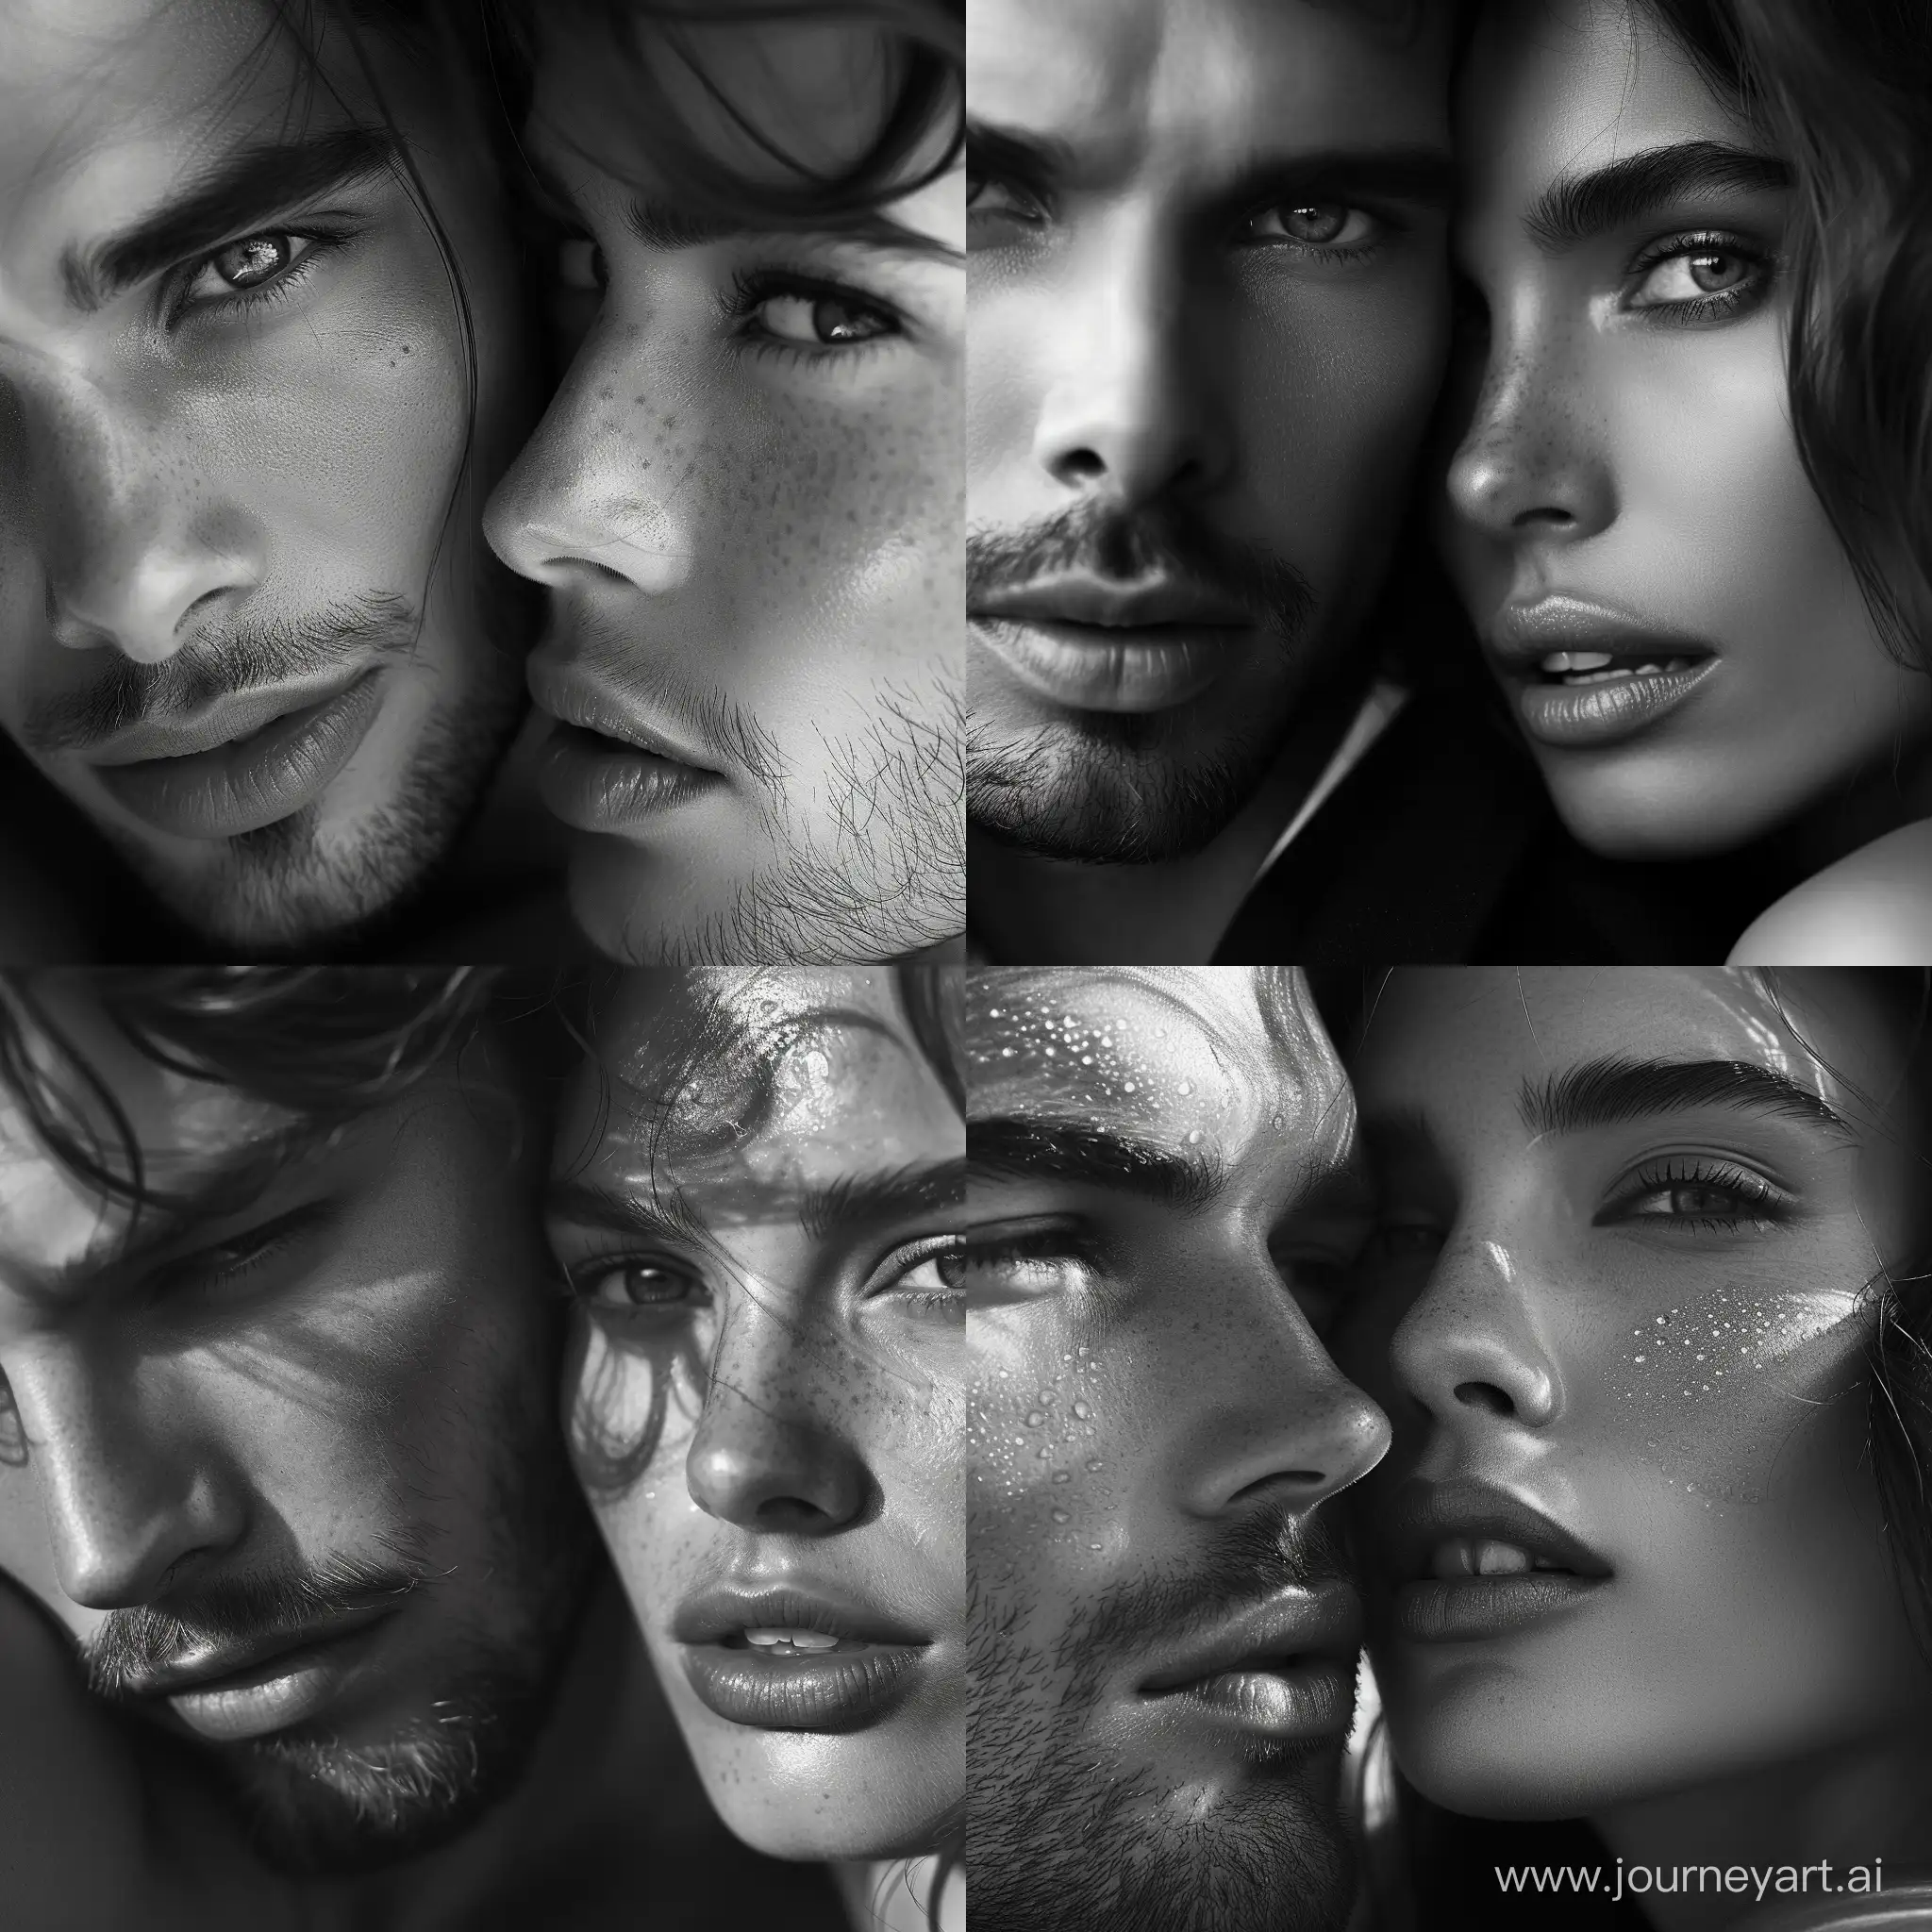 man and woman faces close-up, black and white photography, sensual stylish editorial look